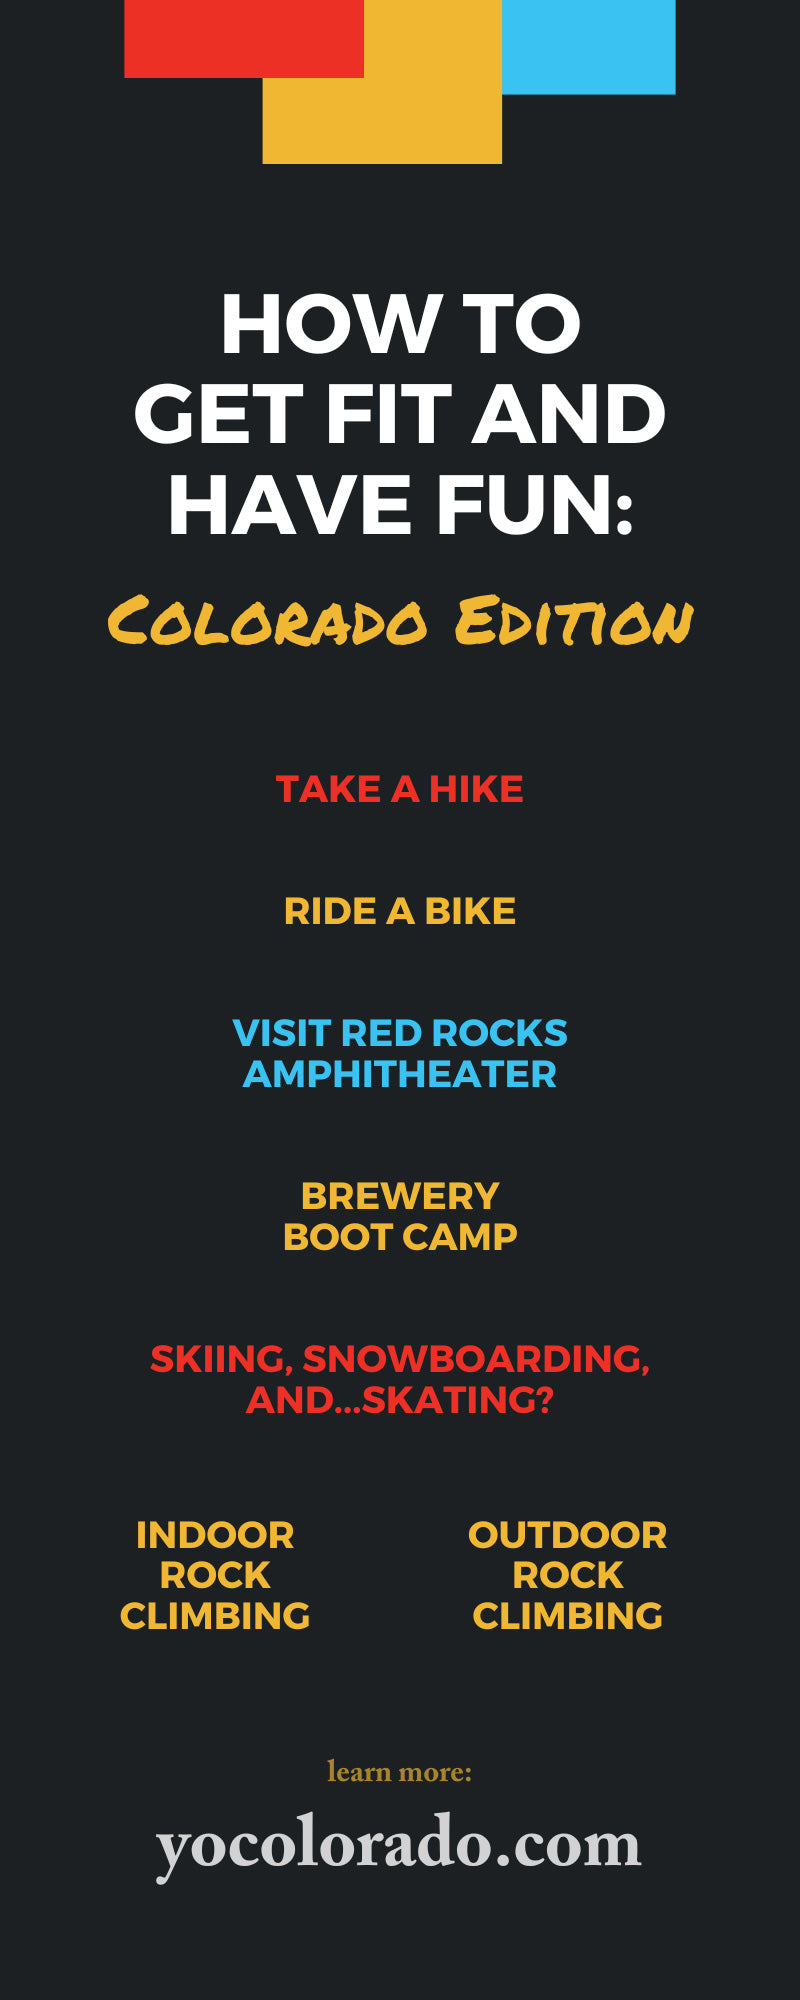 How To Get Fit and Have Fun: Colorado Edition